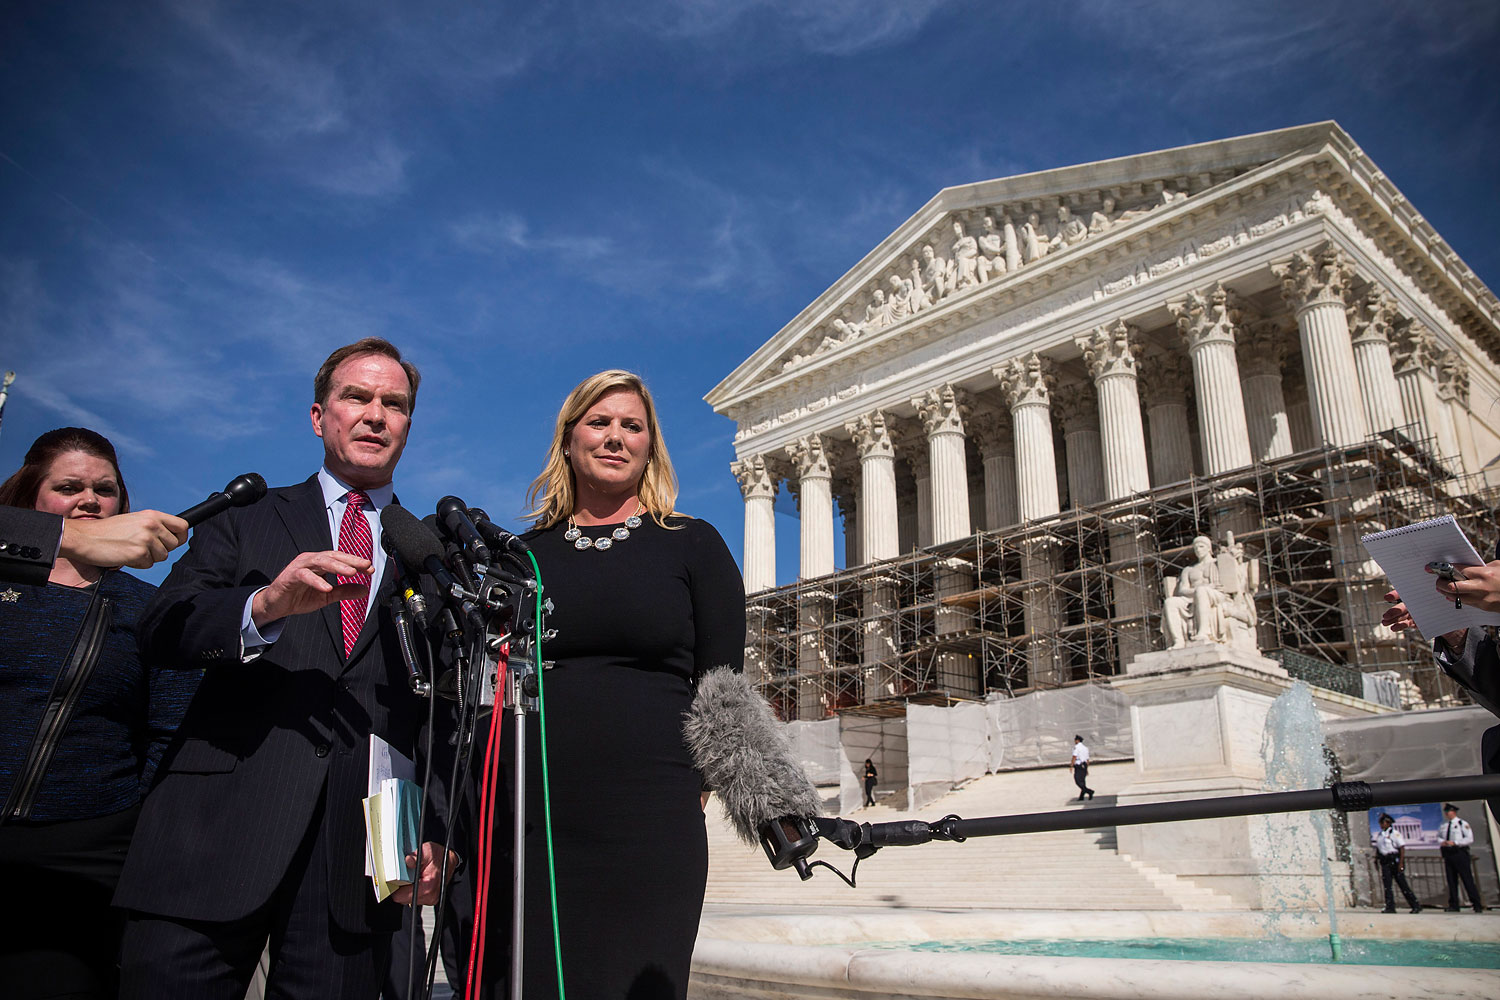 Jennifer Gratz, right, CEO of XIV Foundation and Michigan Attorney General Bill Schuette speak during a press conference outside the Supreme Court after going before the Supreme Court in 